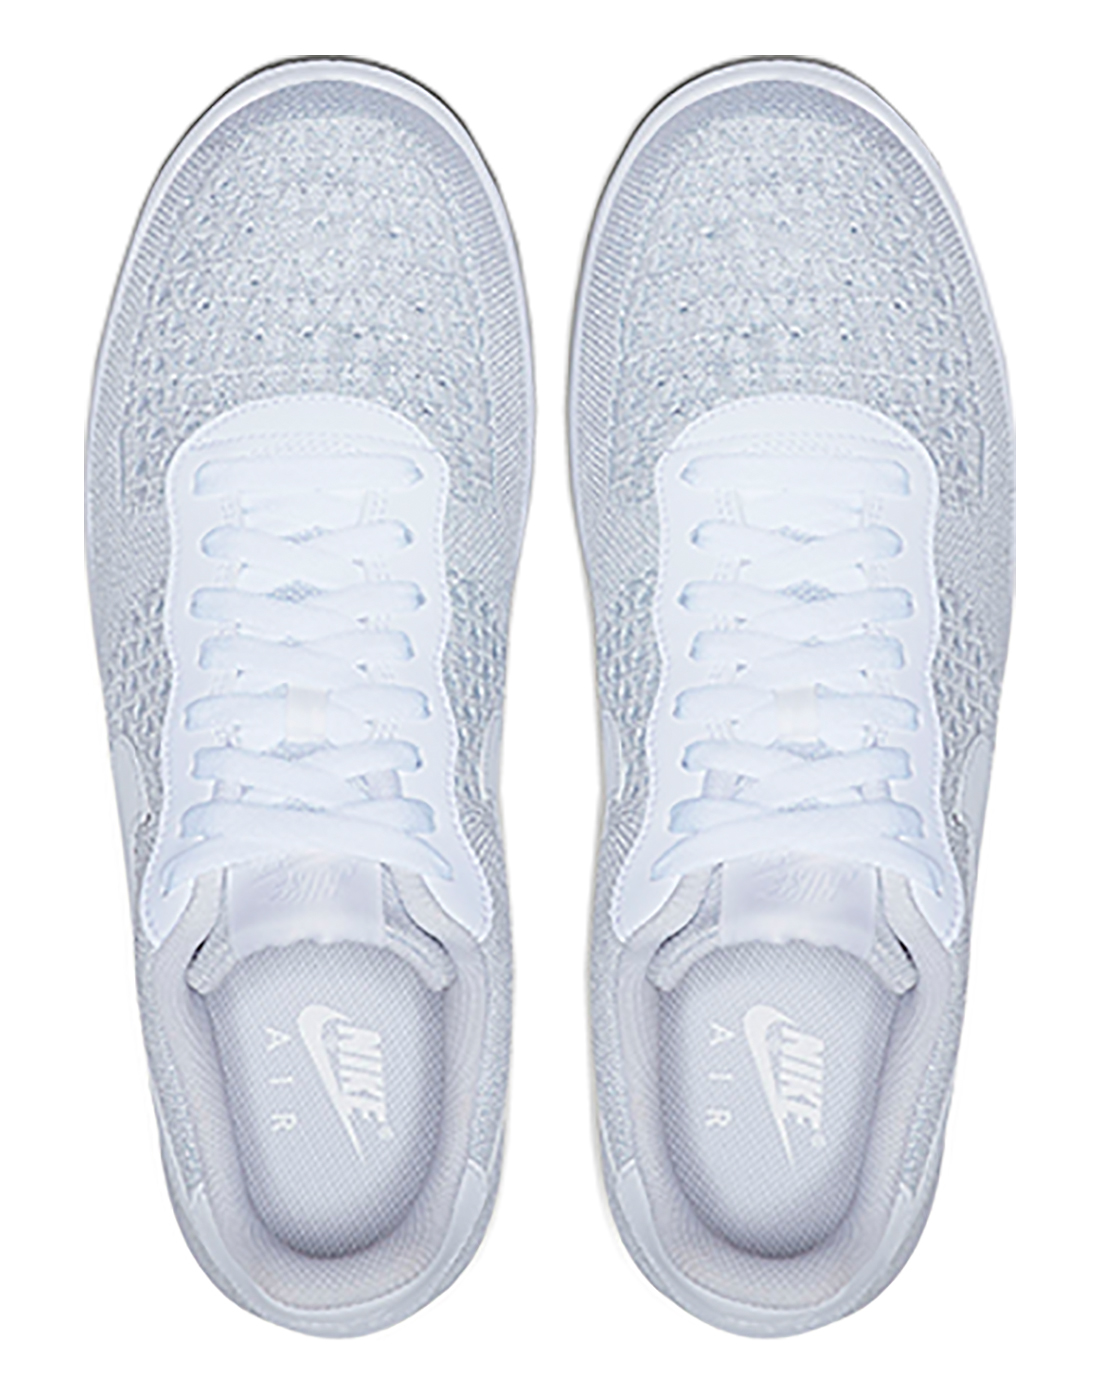 Nike Mens Air Force 1 Flyknit - White | Life Style Sports IE